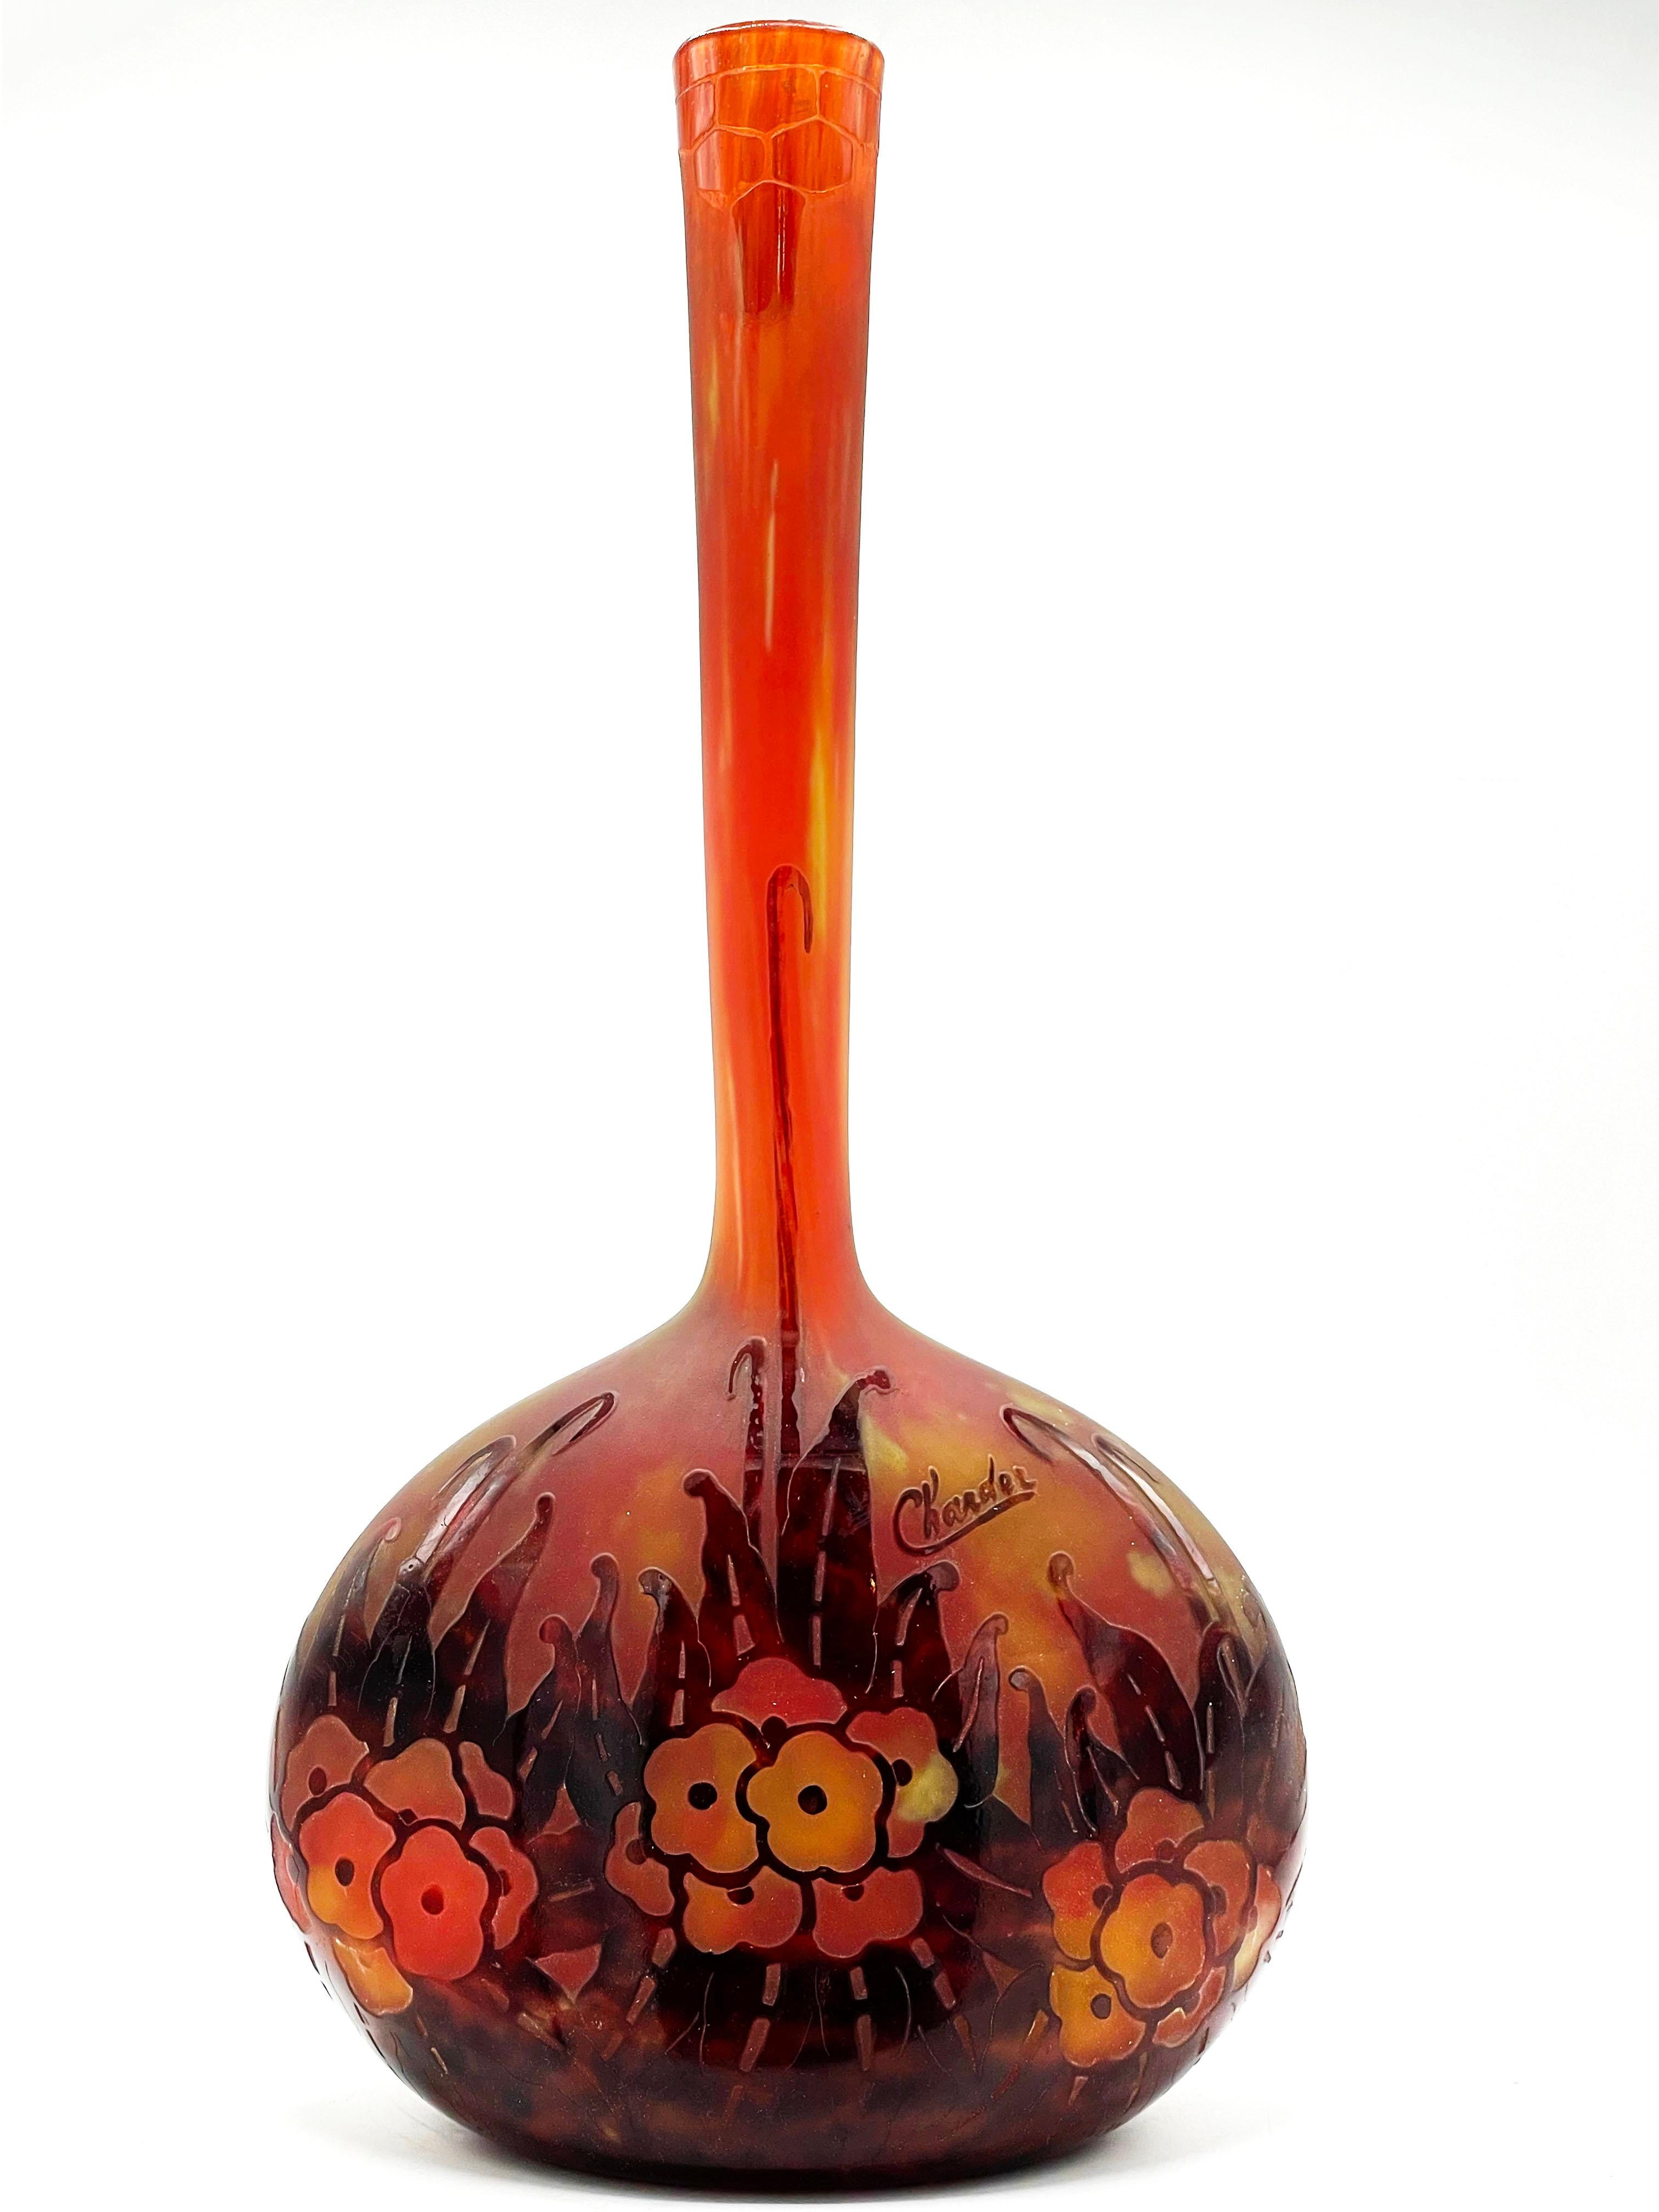 Charder Overlay Glass 
Art Deco glass origin France

French cameo glass vase. The Vase is one of the glass vases with this strange and charming long, tall neck shape that I have personally seen. The Vase has beautiful colors throughout, much